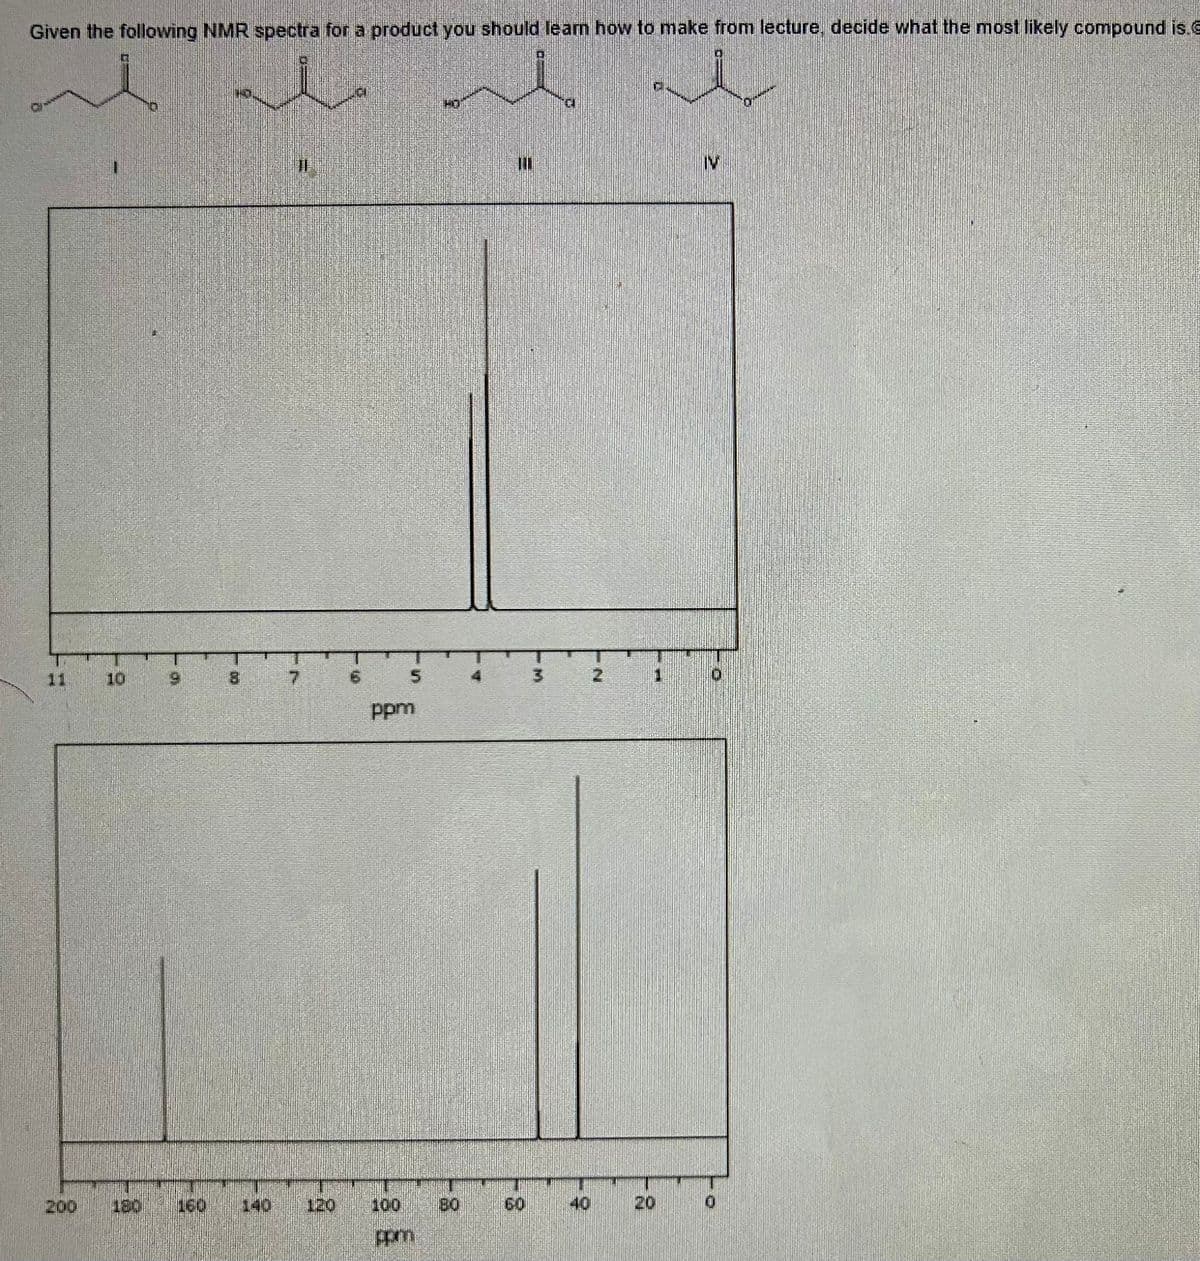 Given the following NMR spectra for a product you should learn how to make from lecture, decide what the most likely compound is.
11
10
6
200
00
IV
7
6
5
3
2
ppm
180
160
120
100
80
60
40
20
ppm